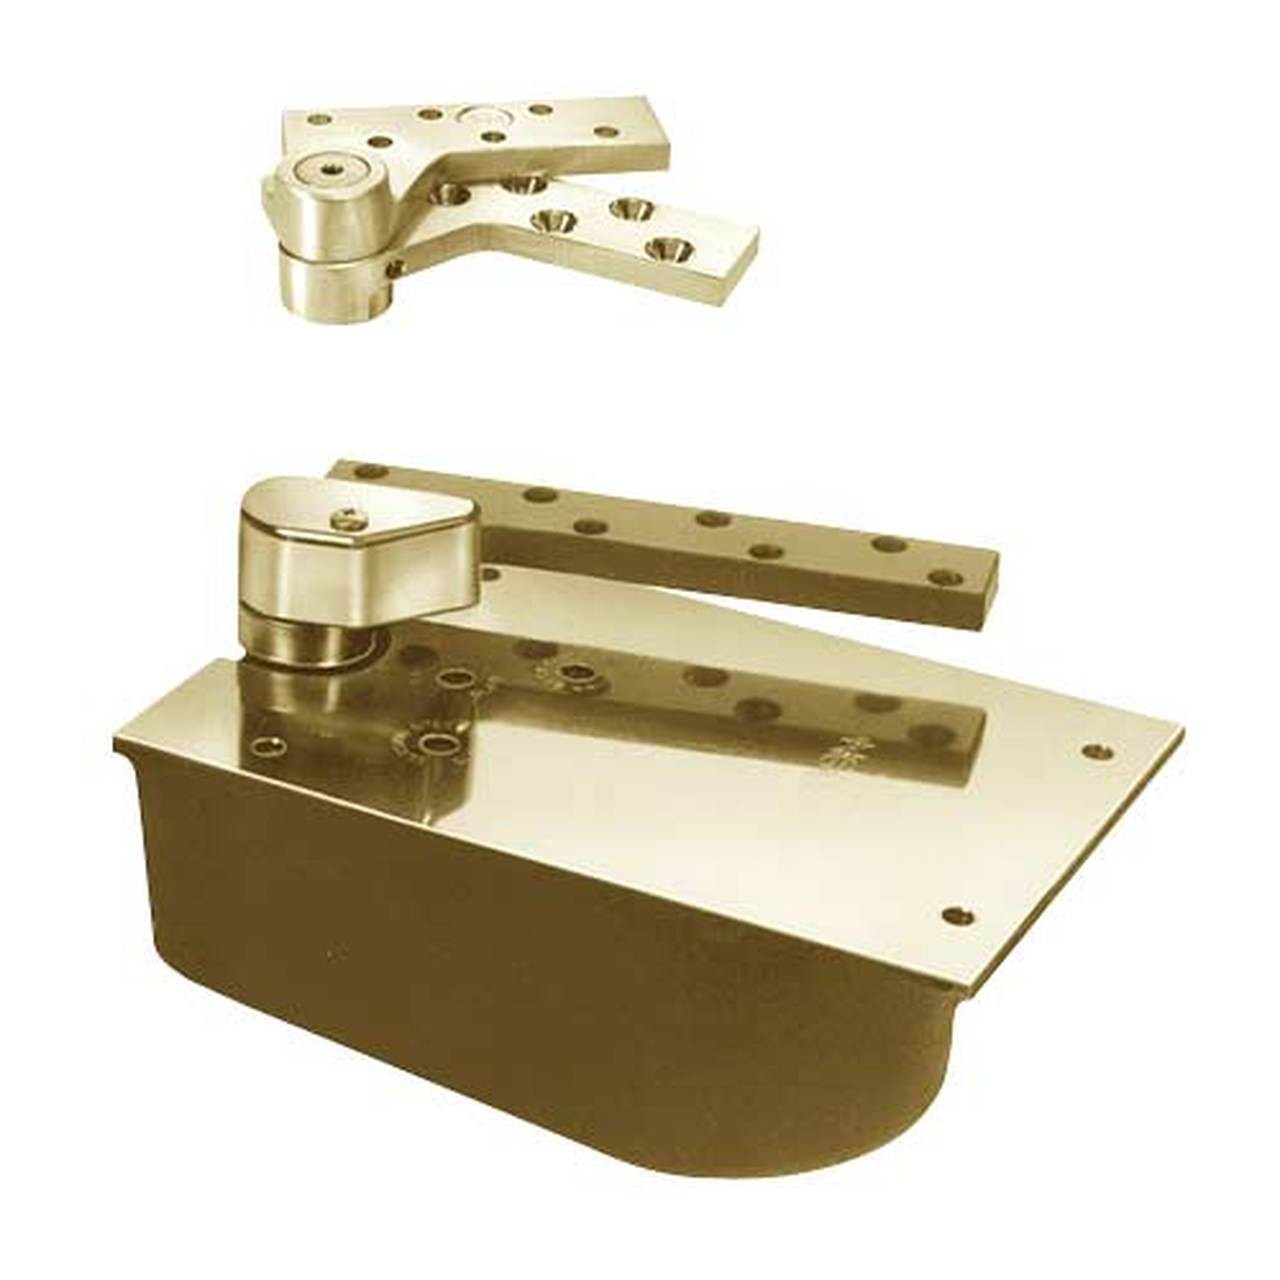 L27-85N-LFP-LCC-LH-2-1/4-606 Rixson 27 Series Extra Heavy Duty Lead Lined Offset Floor Closer in Satin Brass Finish